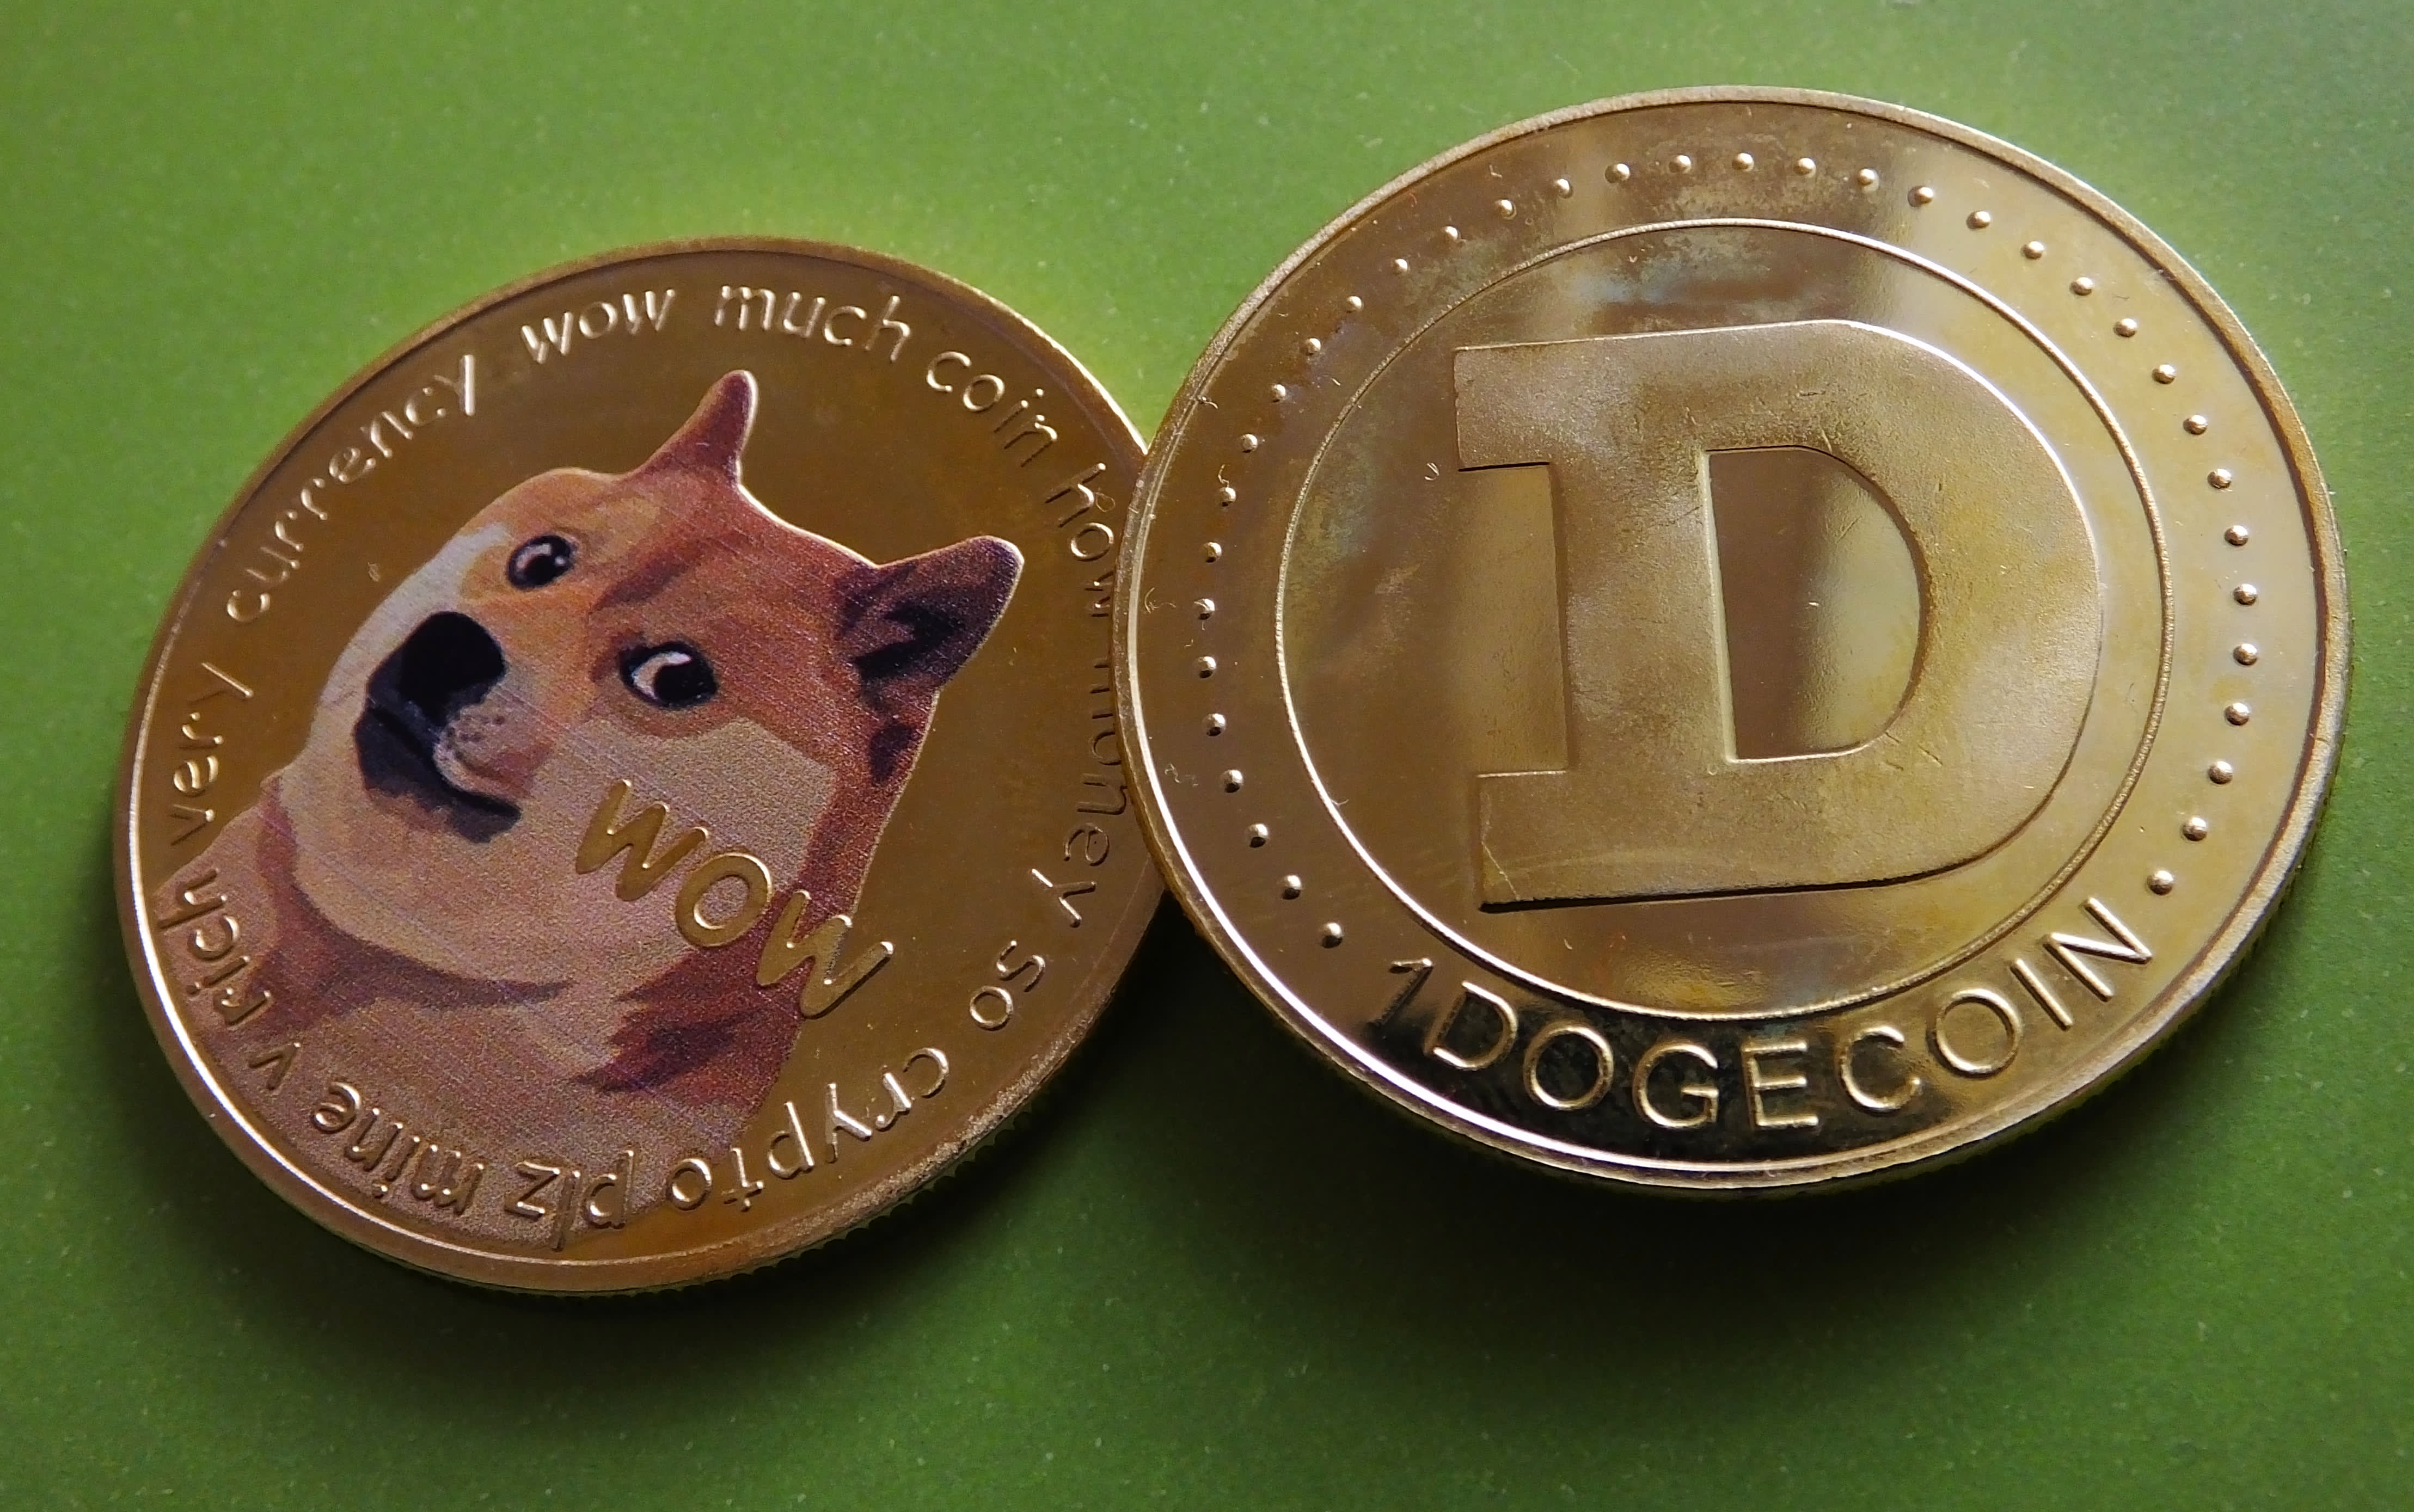 What's behind dogecoin's price spike? Elon Musk and an army of posters